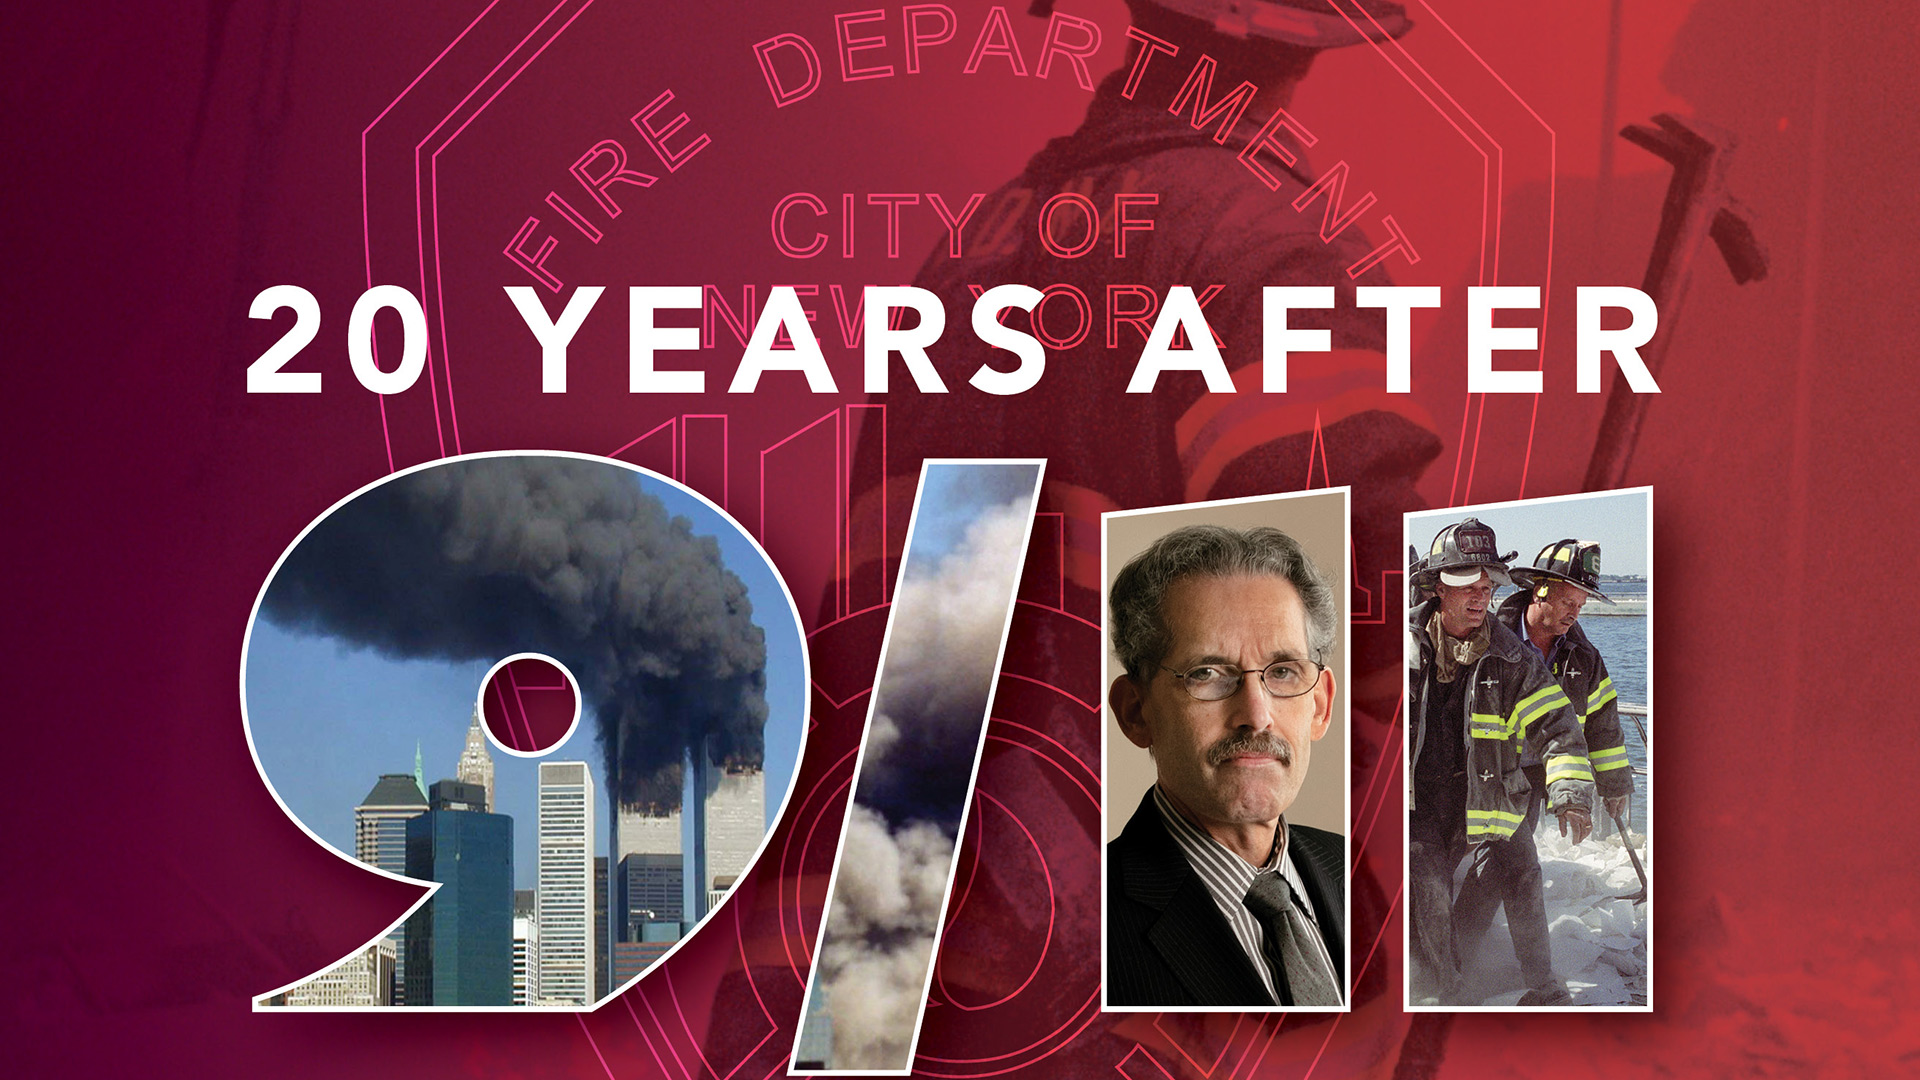 A Groundbreaking Research Program Monitors the Health of 9/11 First Responders